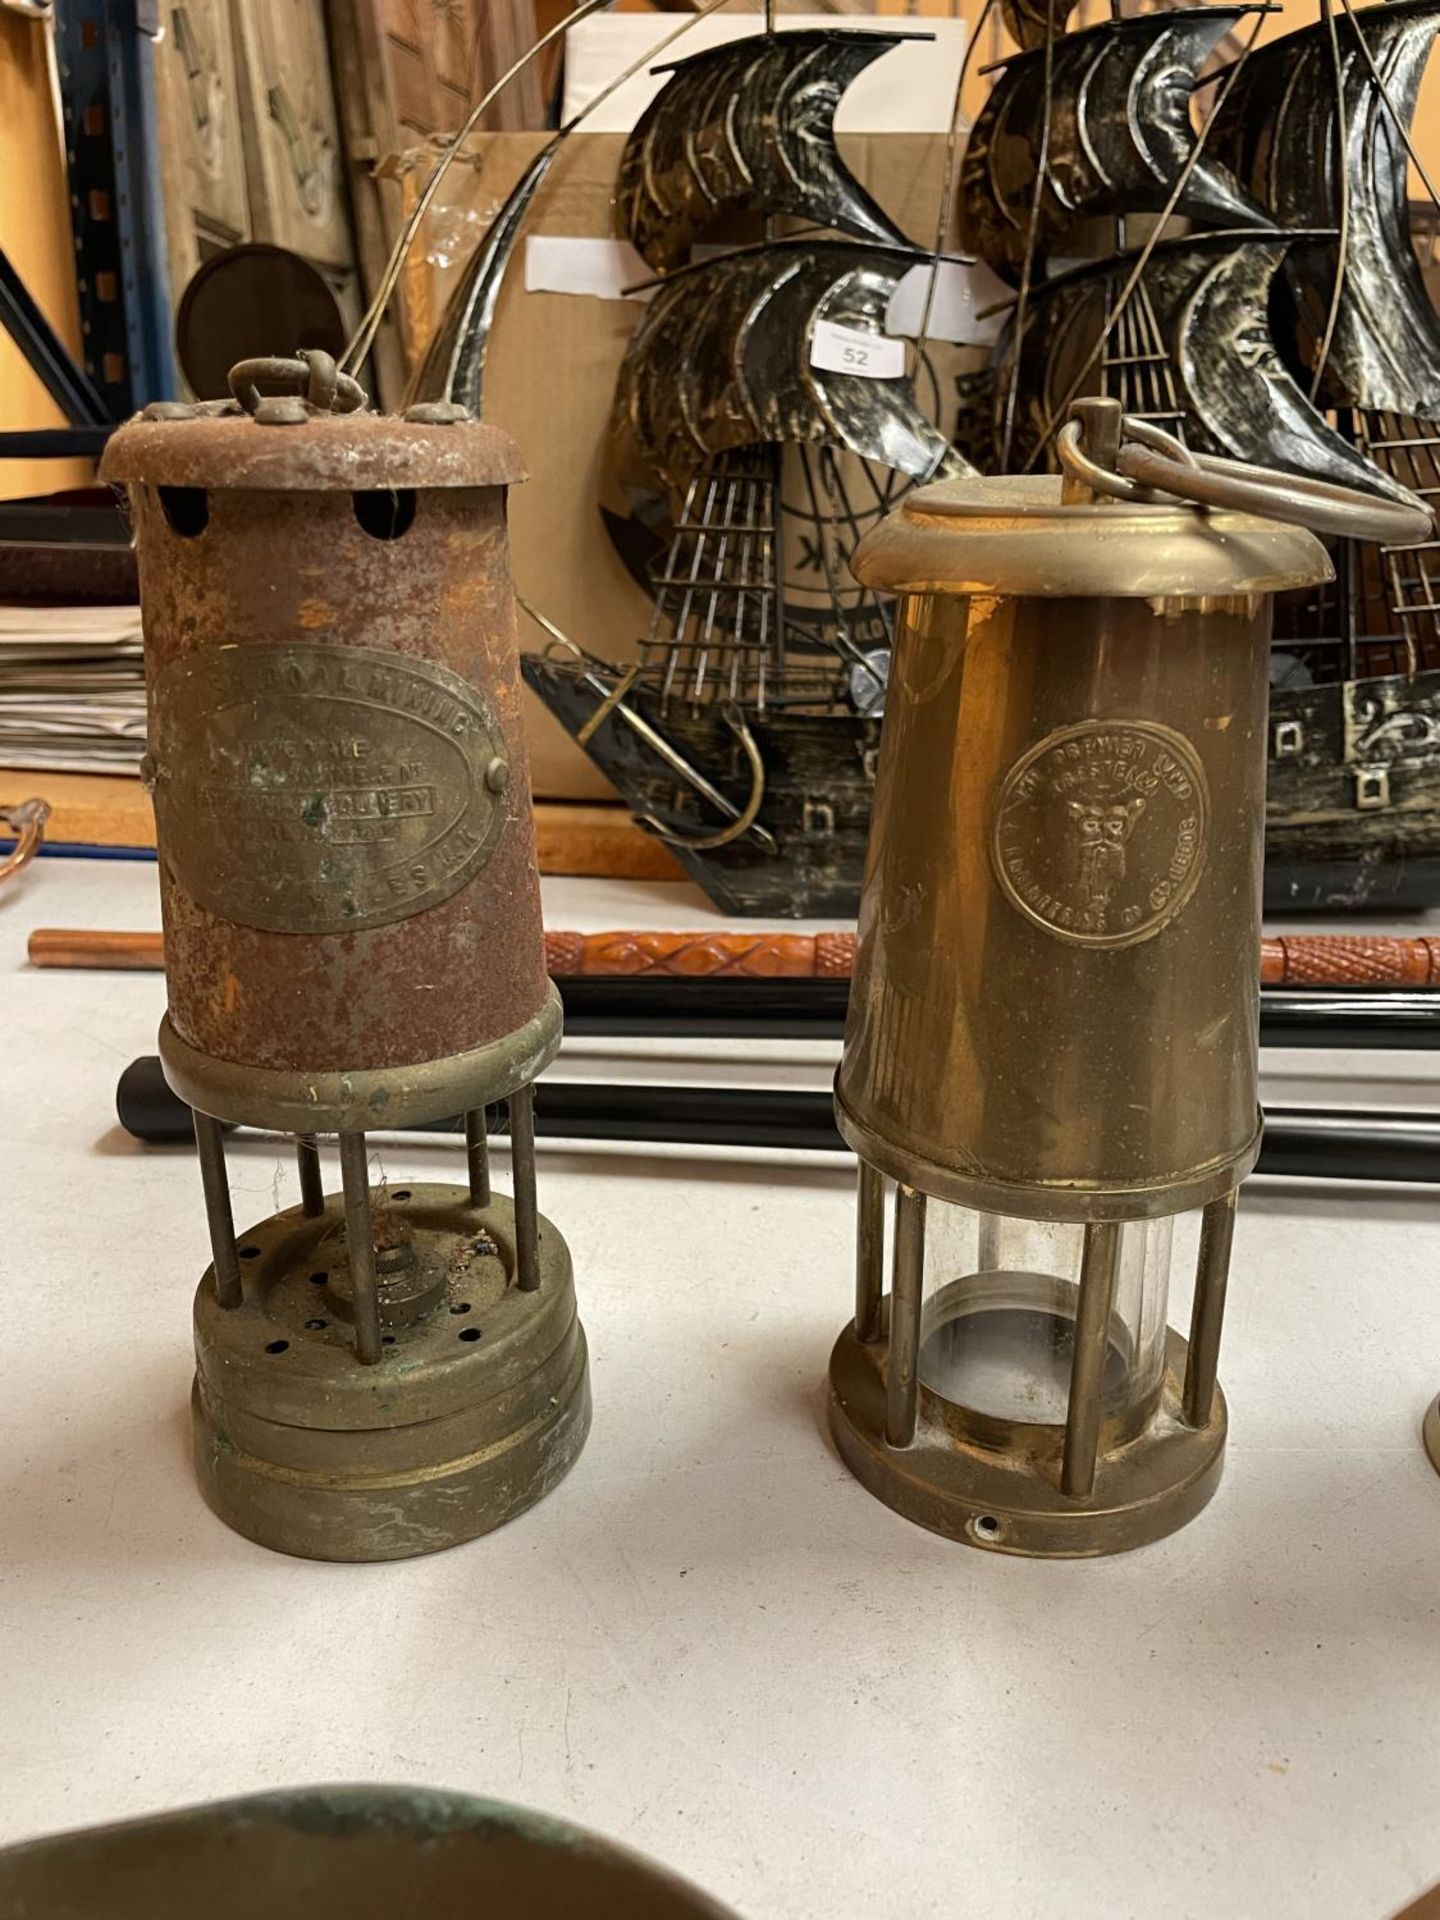 SIX BRASS AND COPPER ITEMS TO INCLUDE TWO MINERS PARAFFIN LAMPS, TWO VASES, PAN AND A BELL DOME - Image 2 of 4